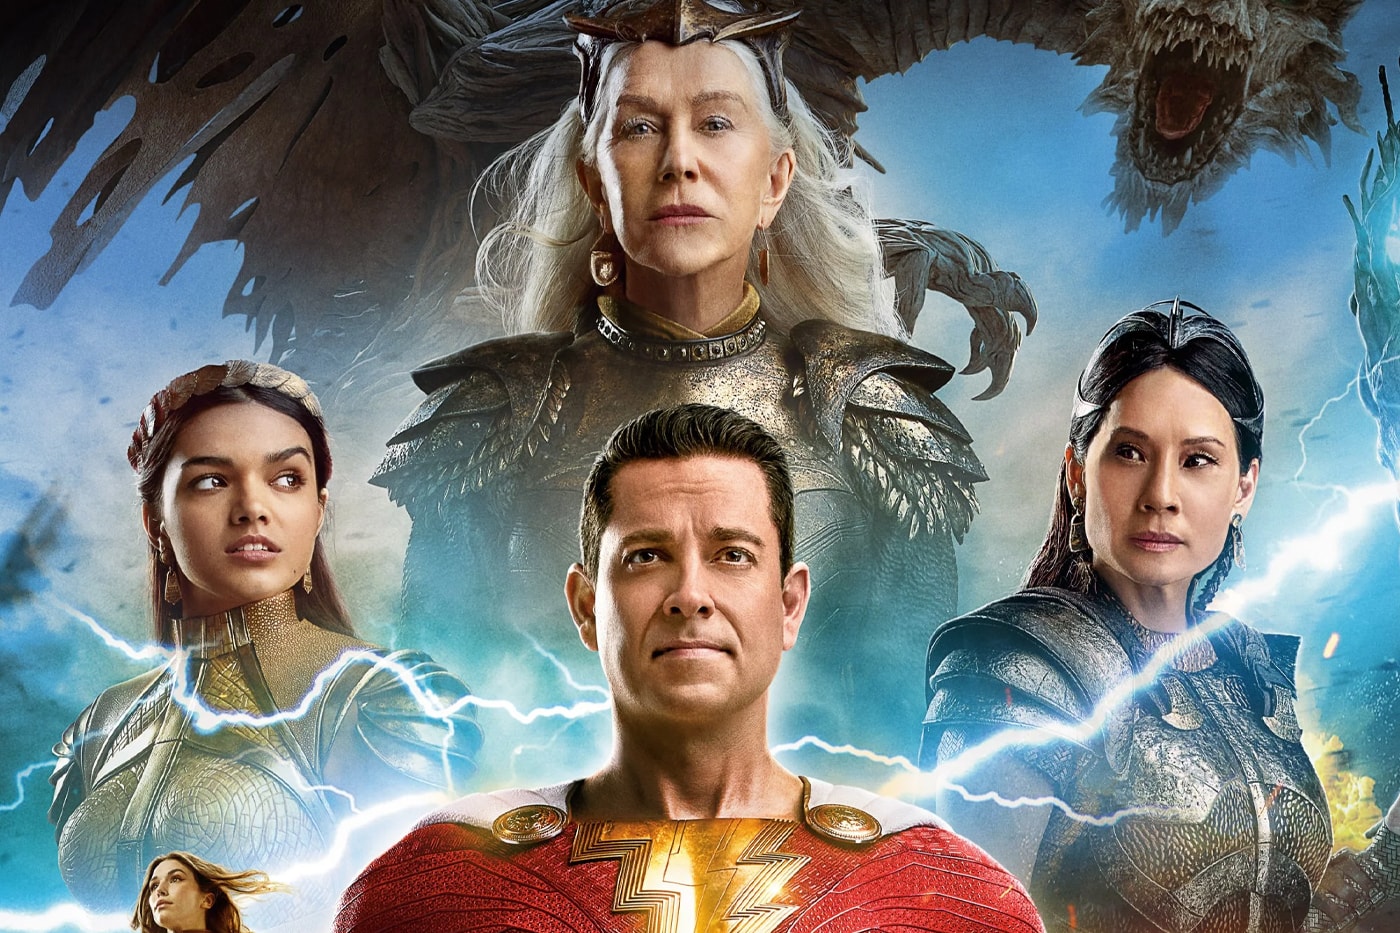 What We're Watching: 'Shazam! Fury of the Gods' Opens to a Mortal $30.5  Million – Pasadena Weekendr